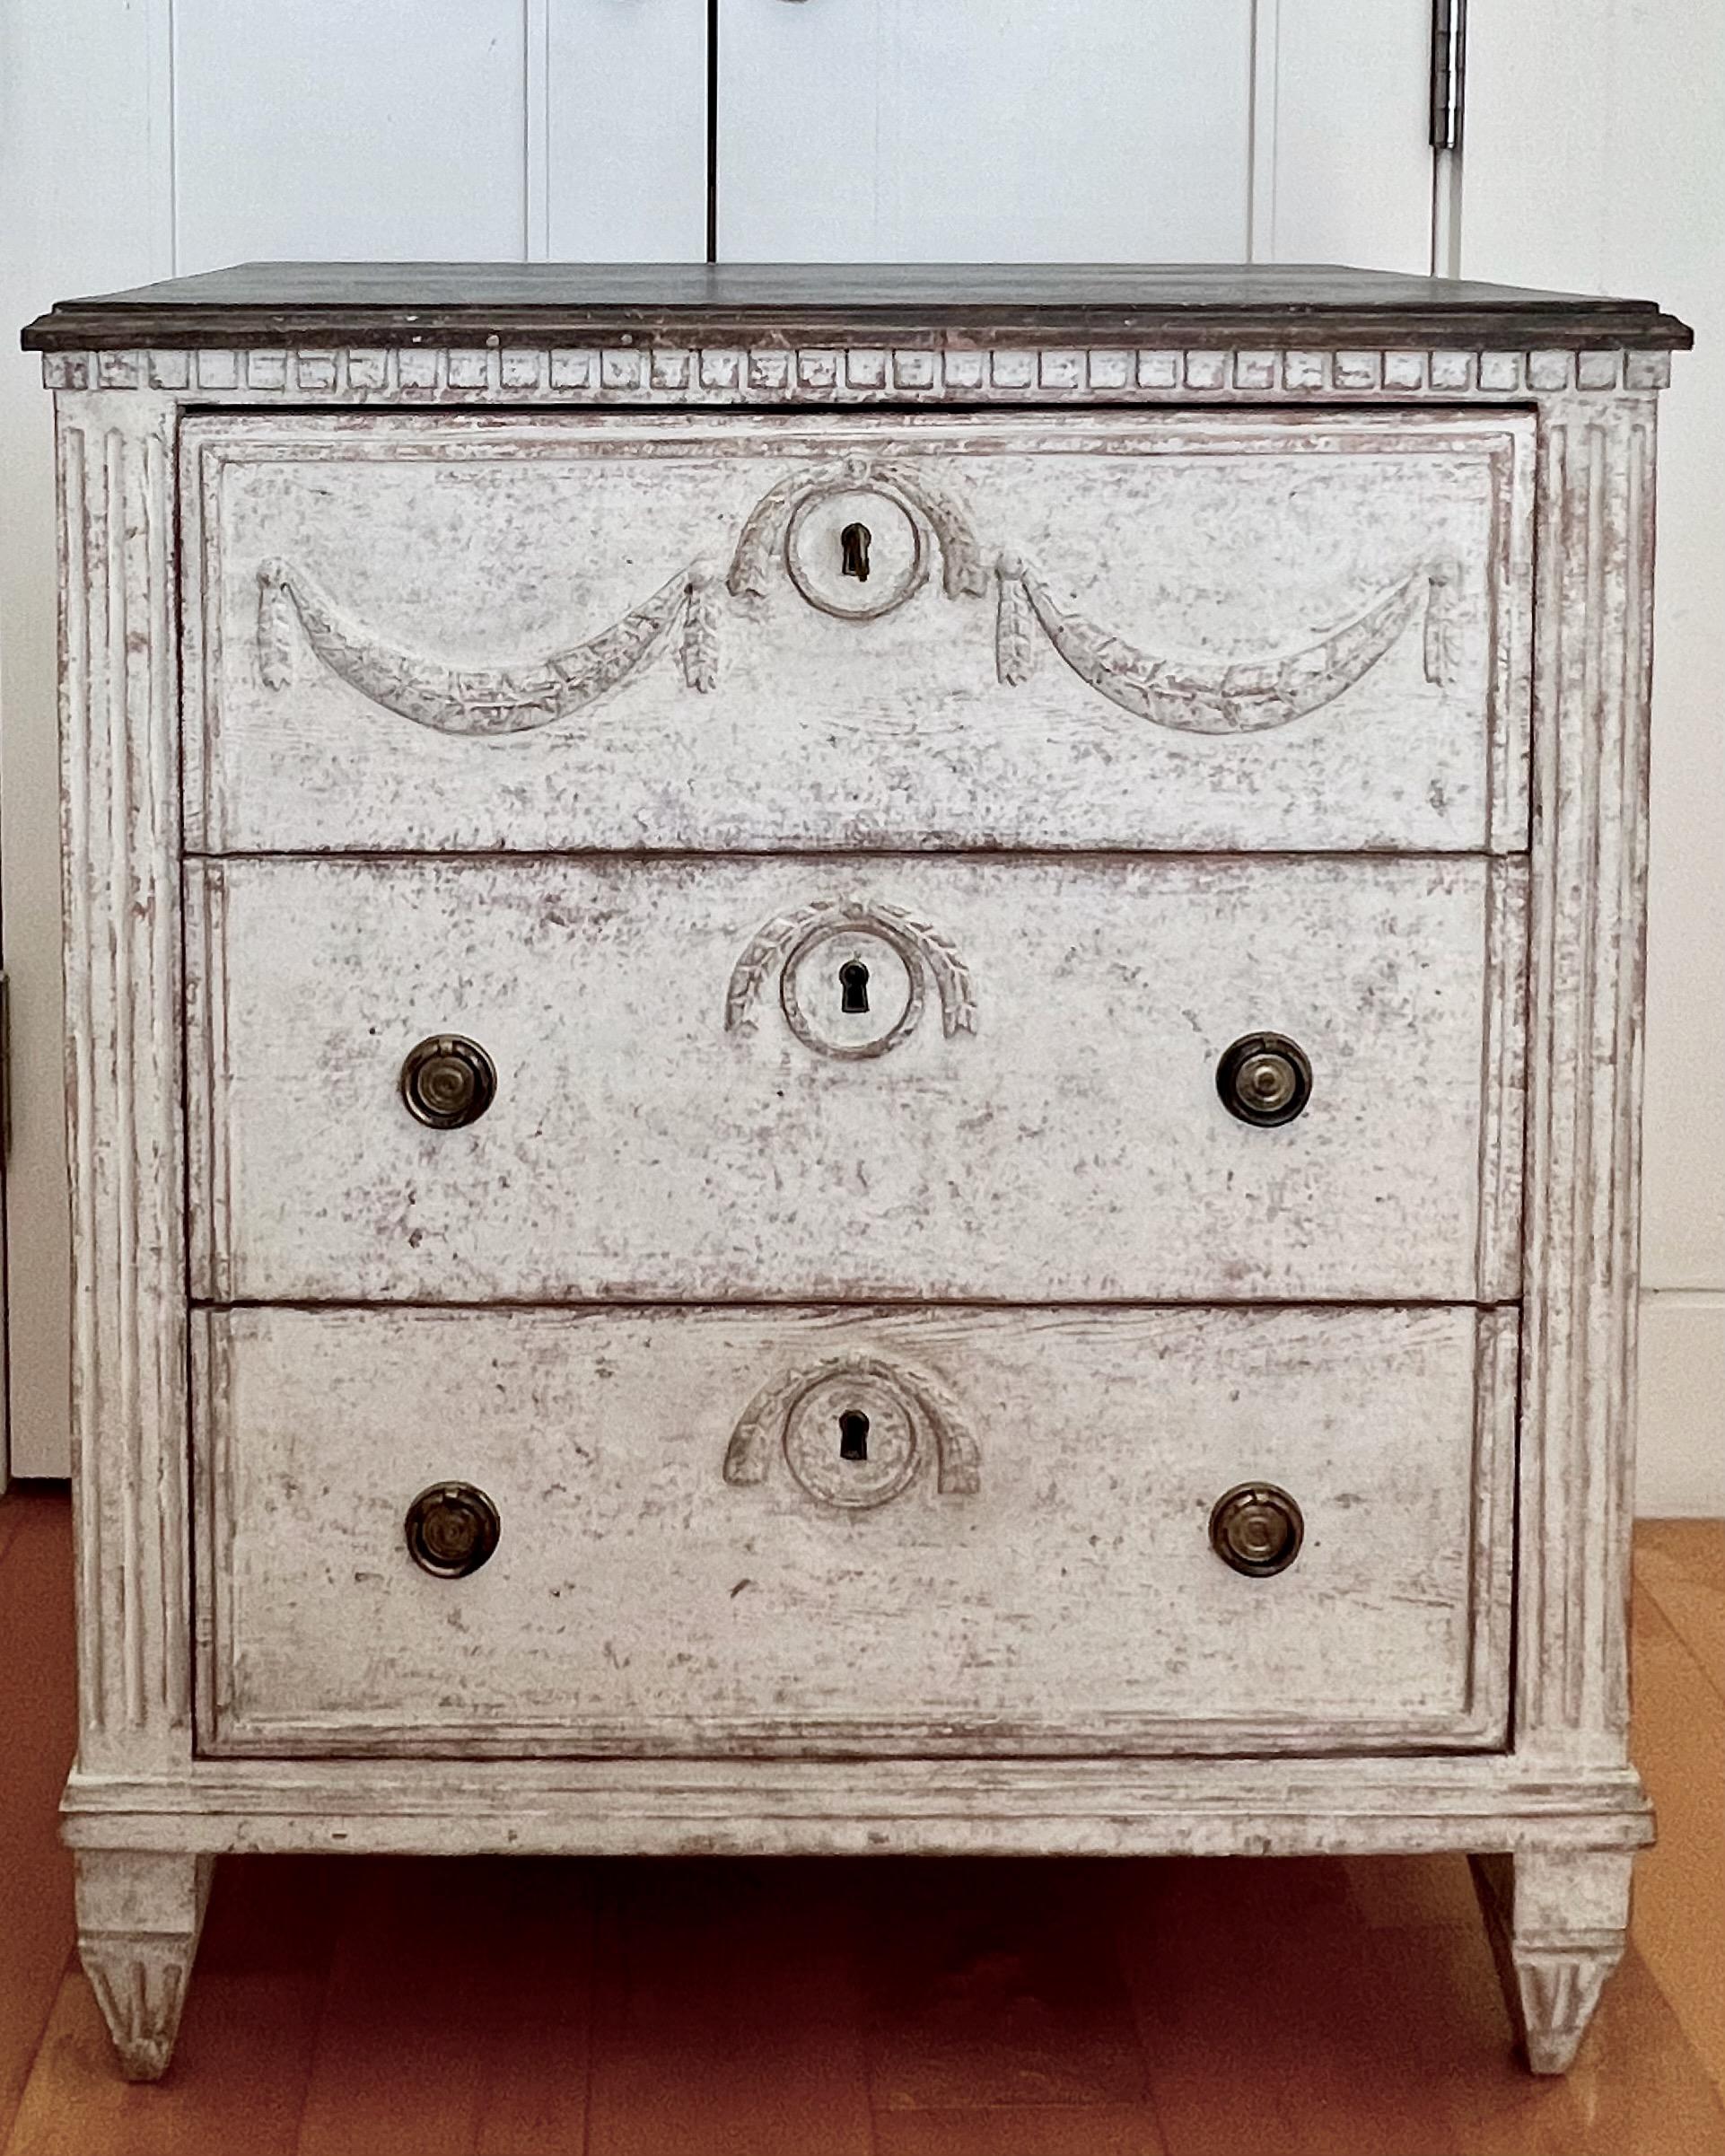 Charming 19th century Swedish three drawer chest with carved dentil moldings, canted corners, fluted side post and classic ribbon and swag decorations, painted in light gray with blackish wooden top.
Sweden 